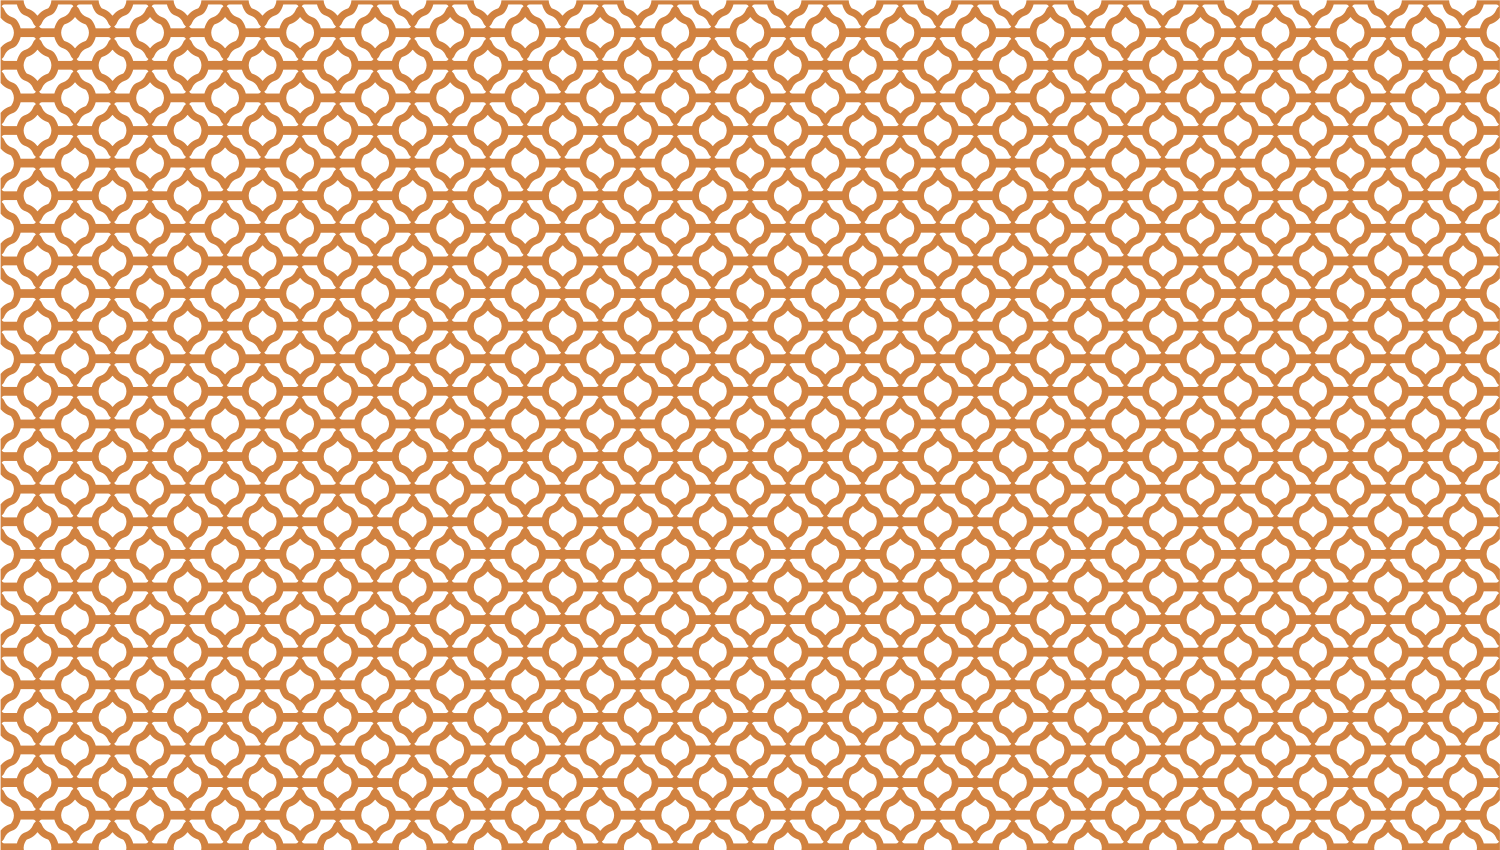 Parasoleil™ Diane© pattern displayed with a ochre color overlay